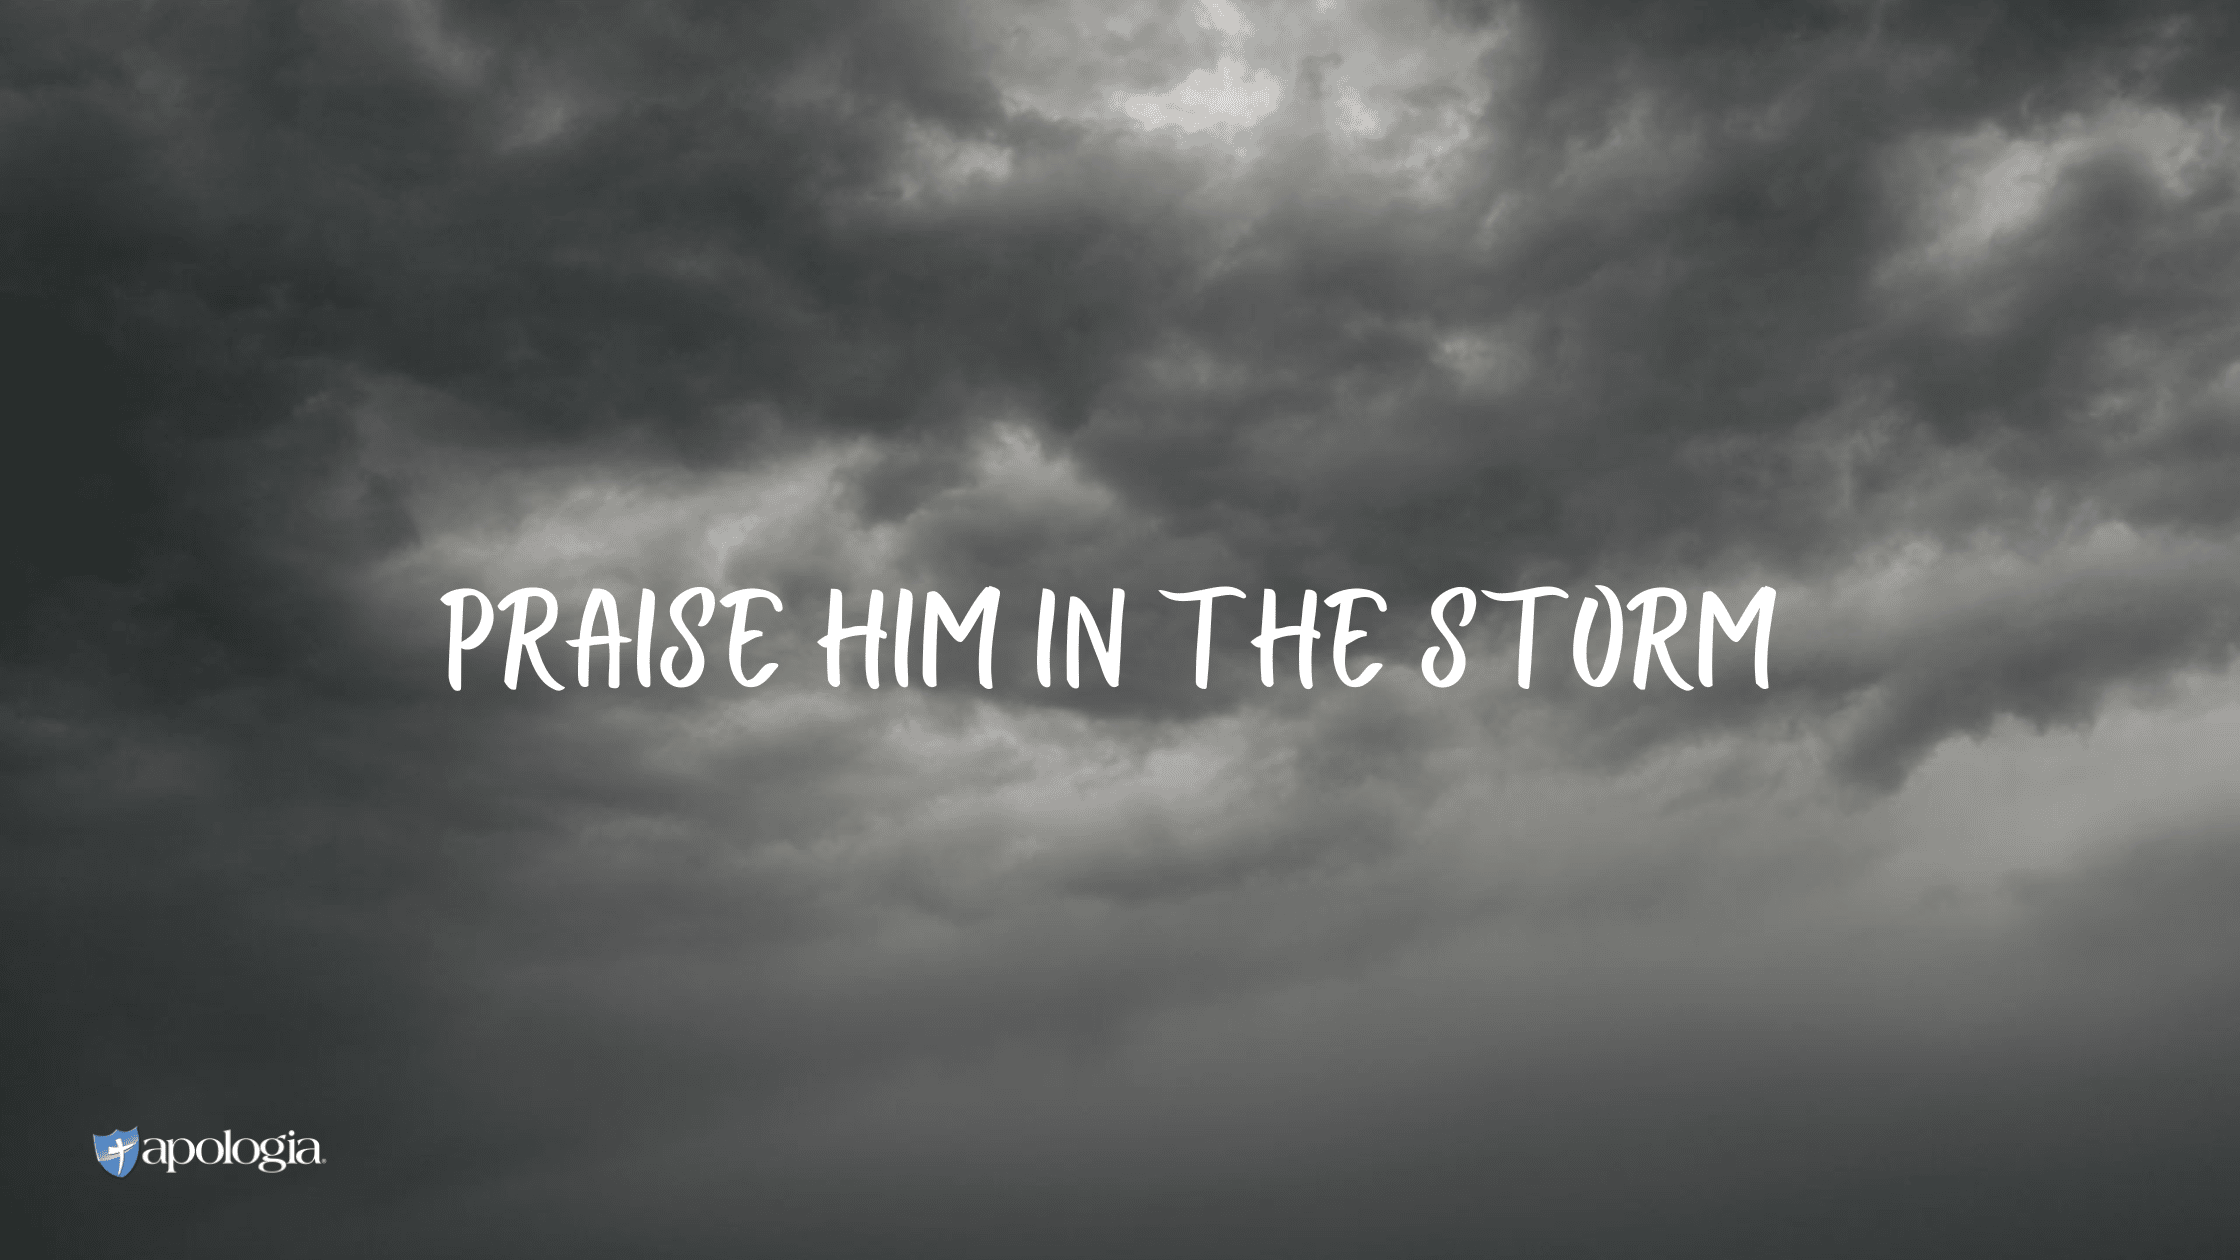 Praise Him in the Storm